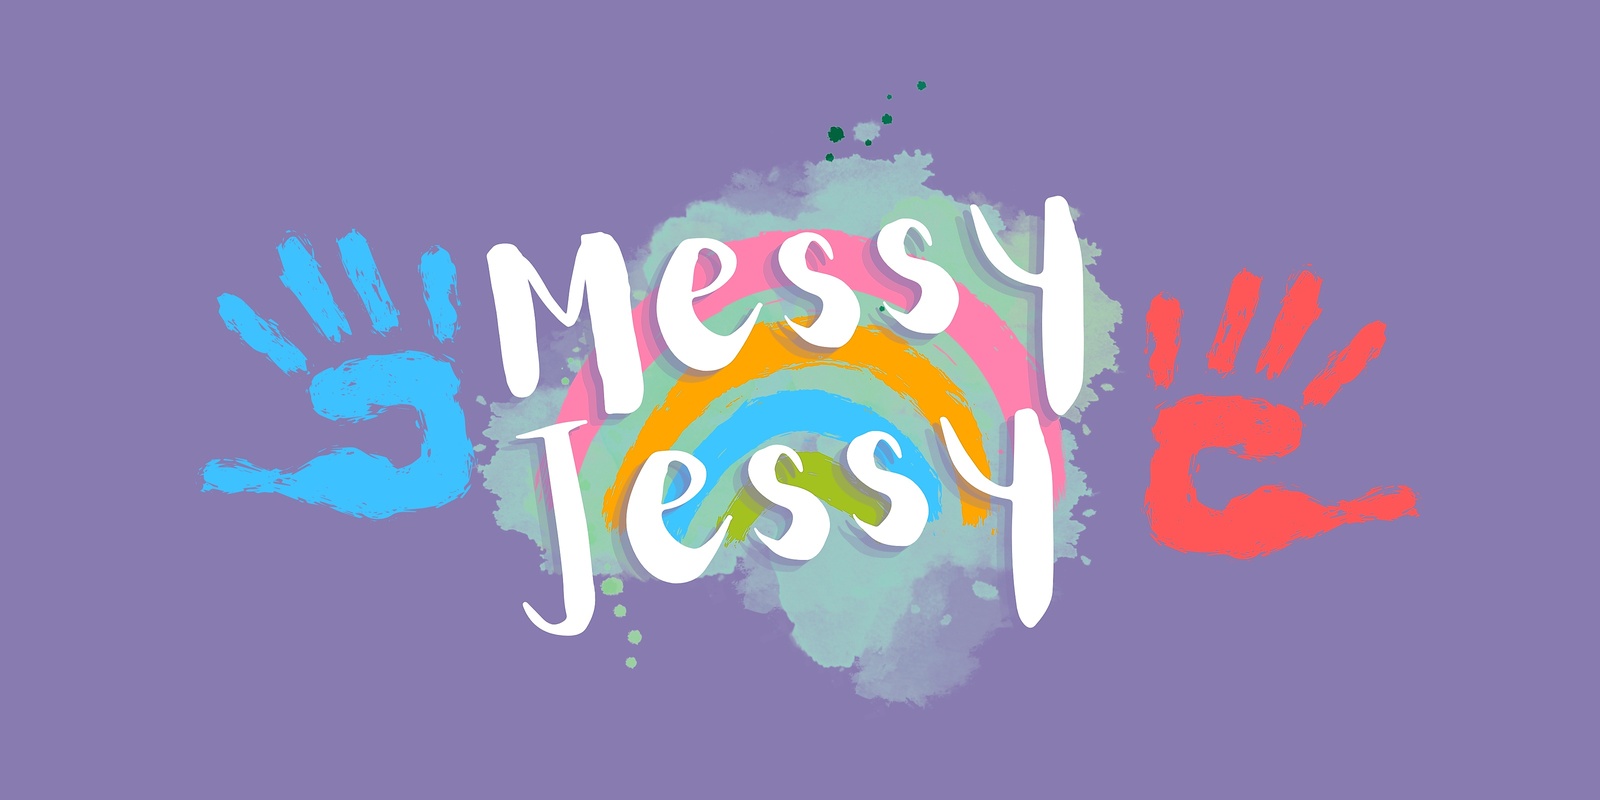 Banner image for Messy Jessy Sensory Play 